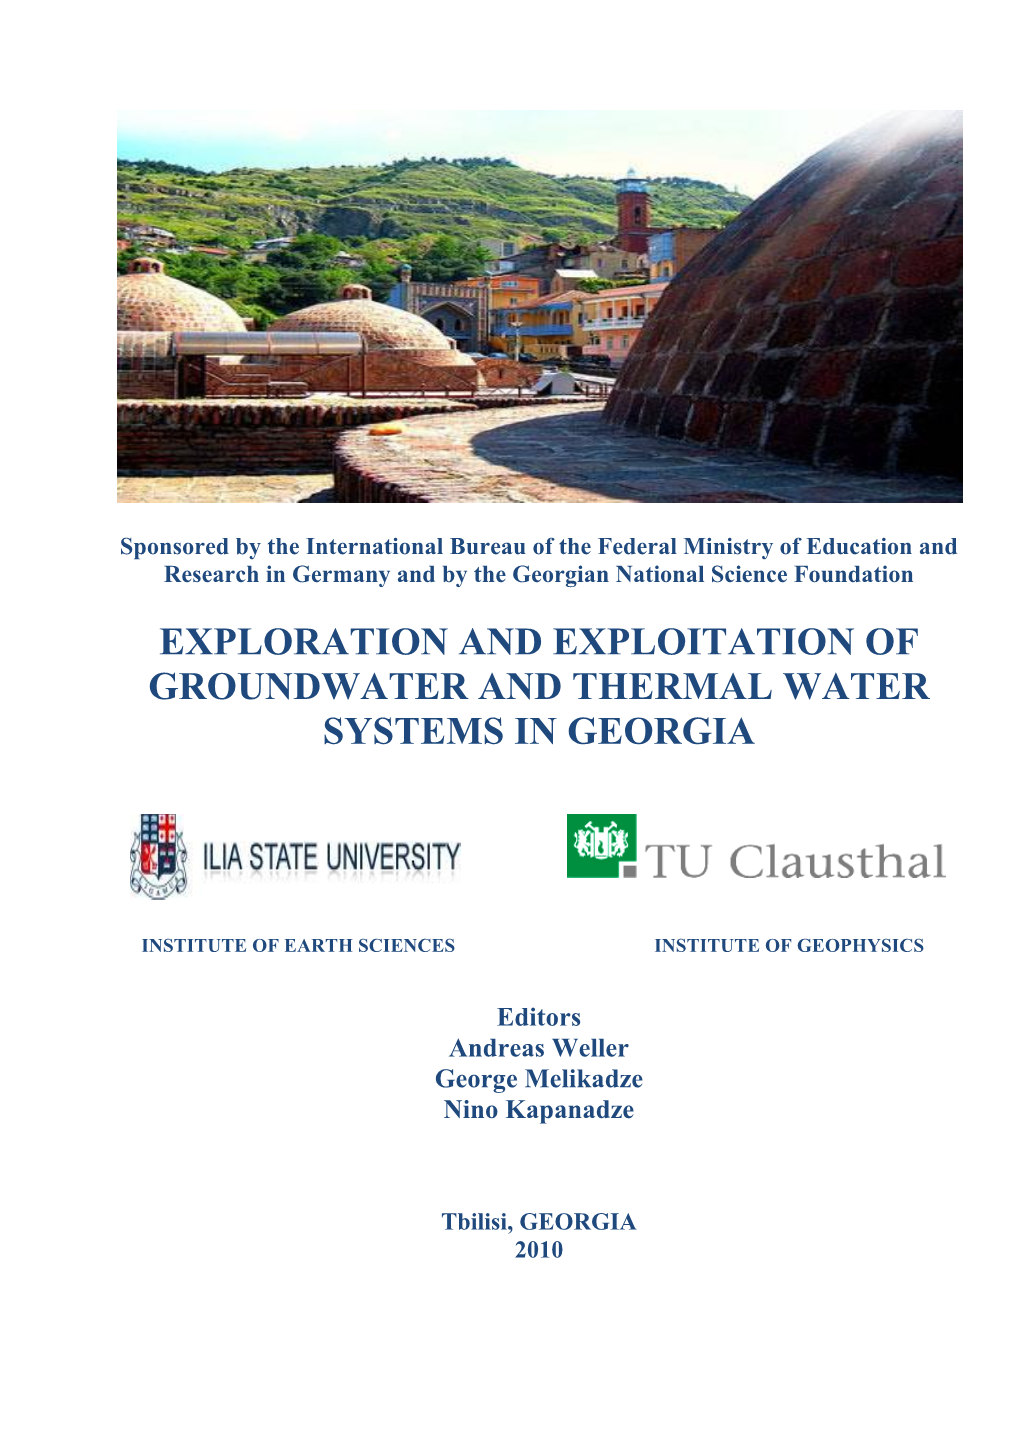 Exploration and Exploitation of Groundwater and Thermal Water Systems in Georgia